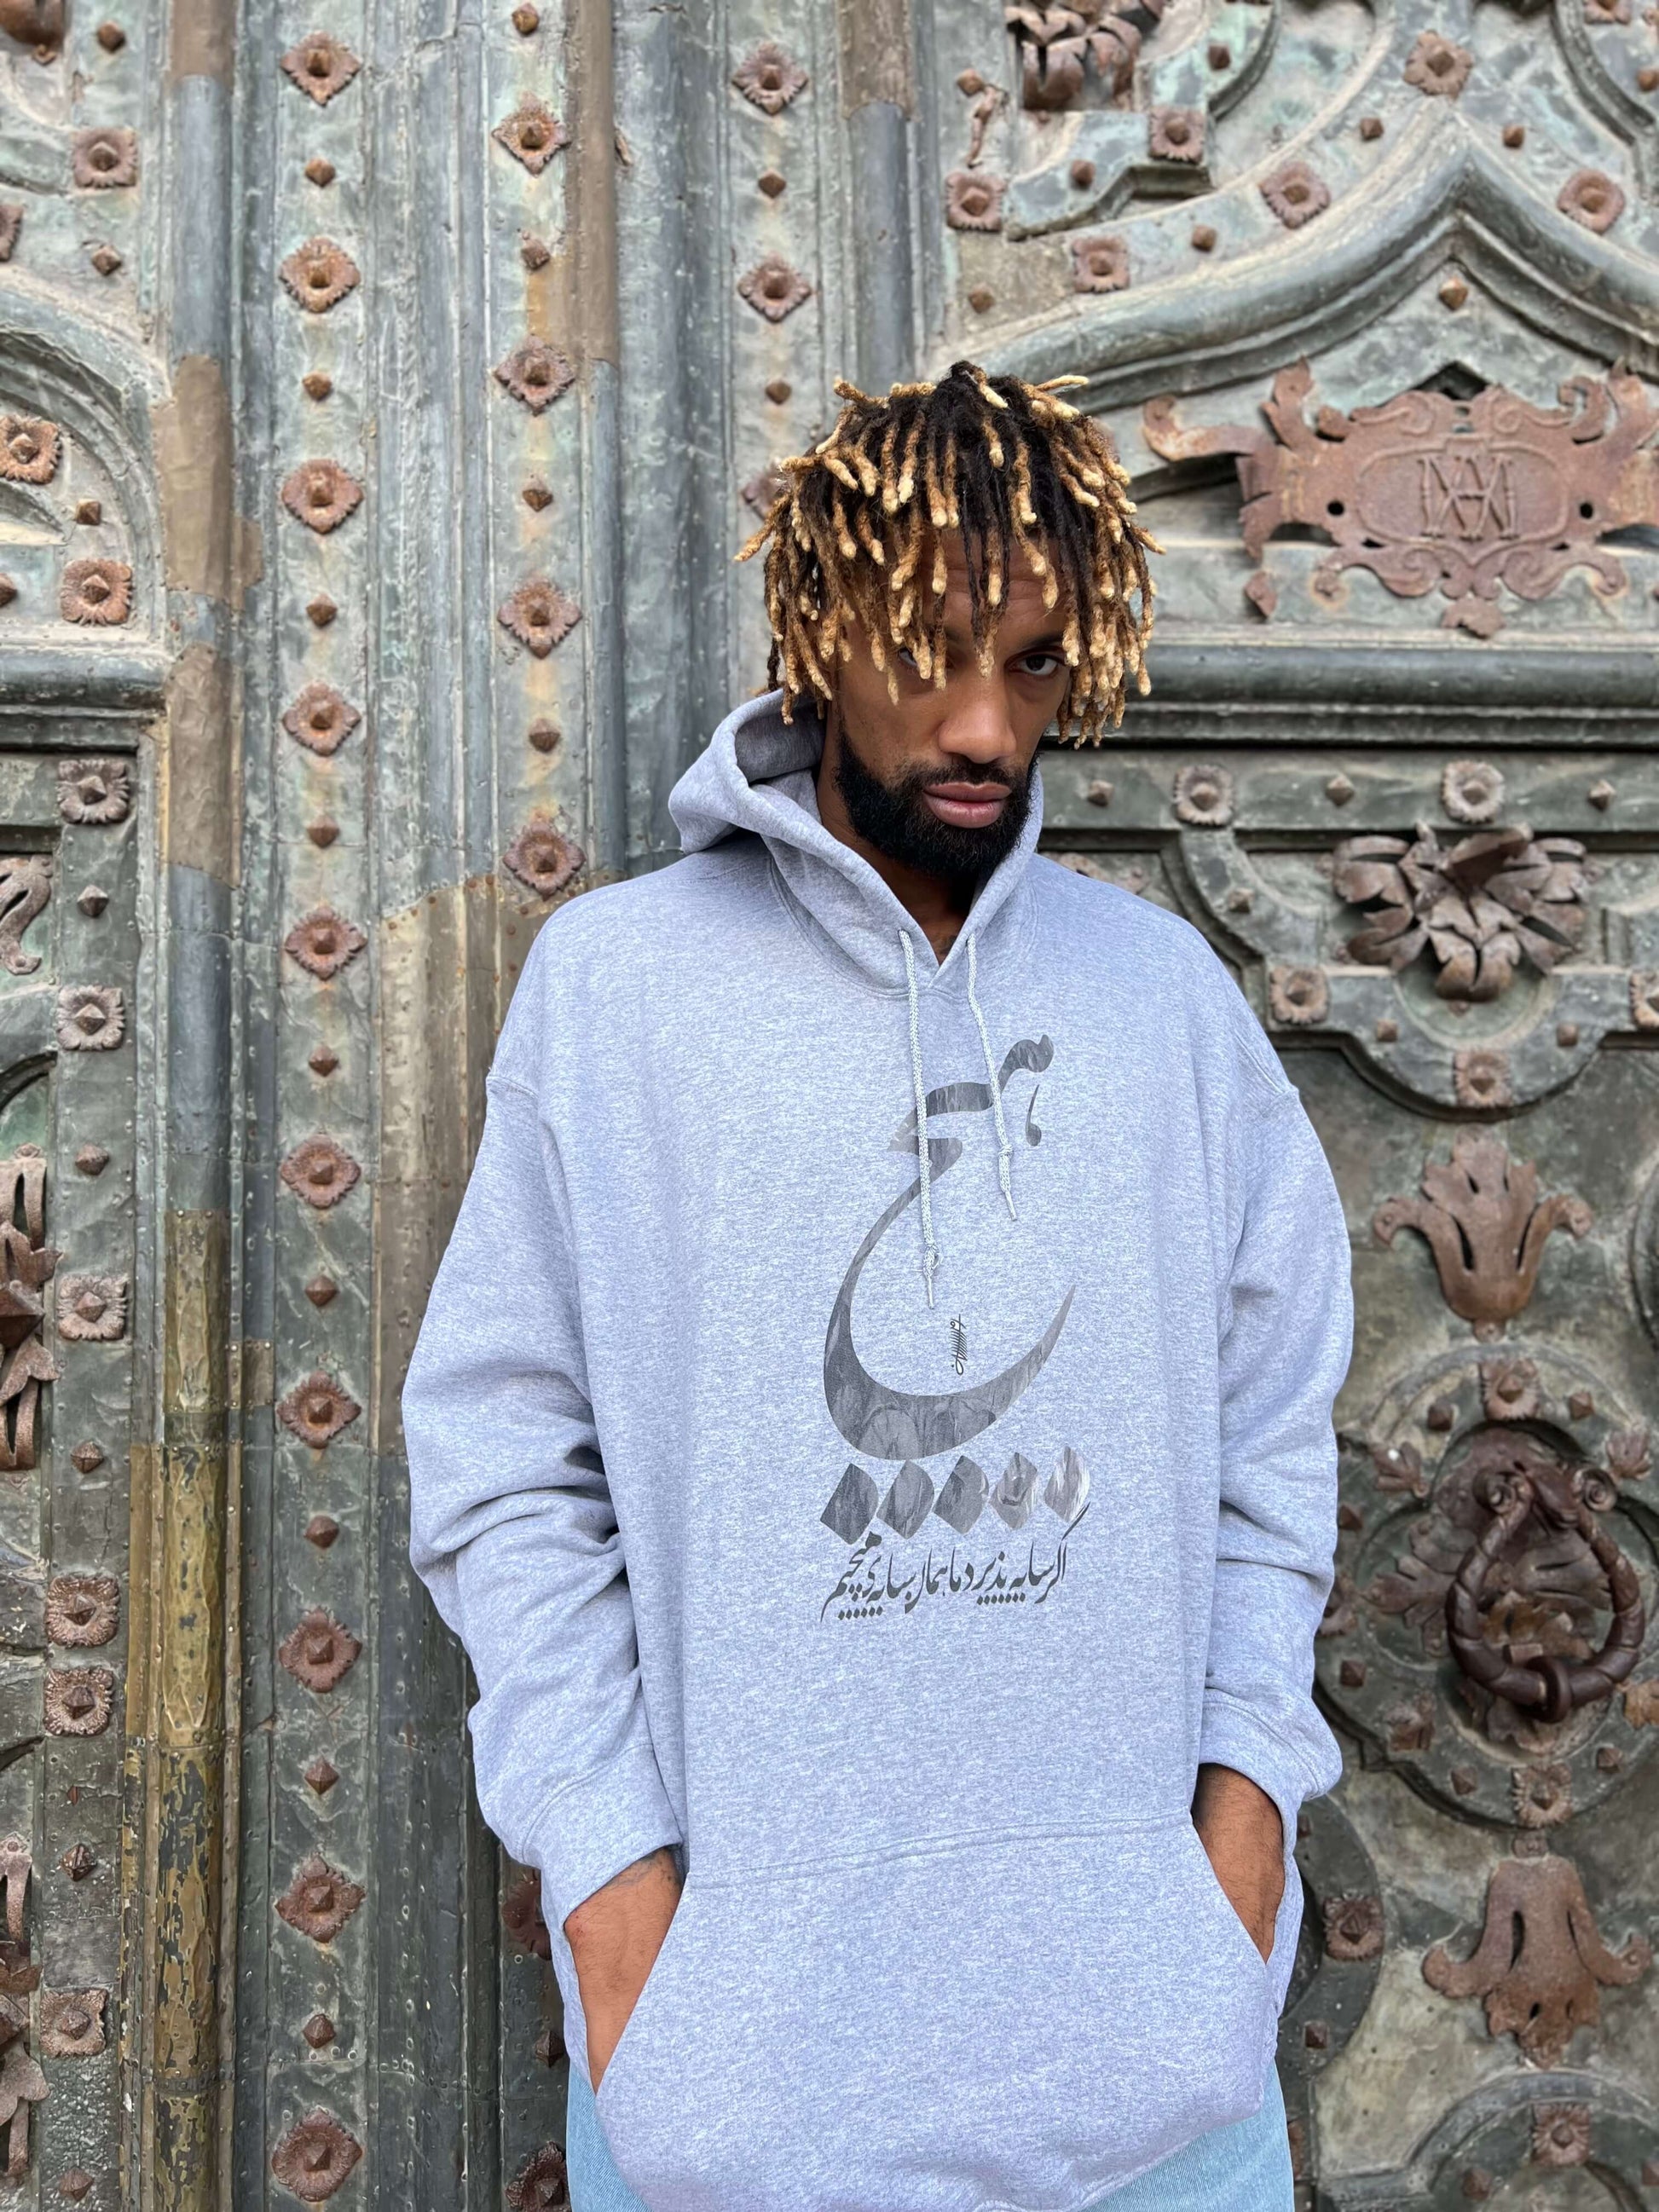 Khem Birch wearing Textured hoodie featuring Persian calligraphy and meaningful verse.